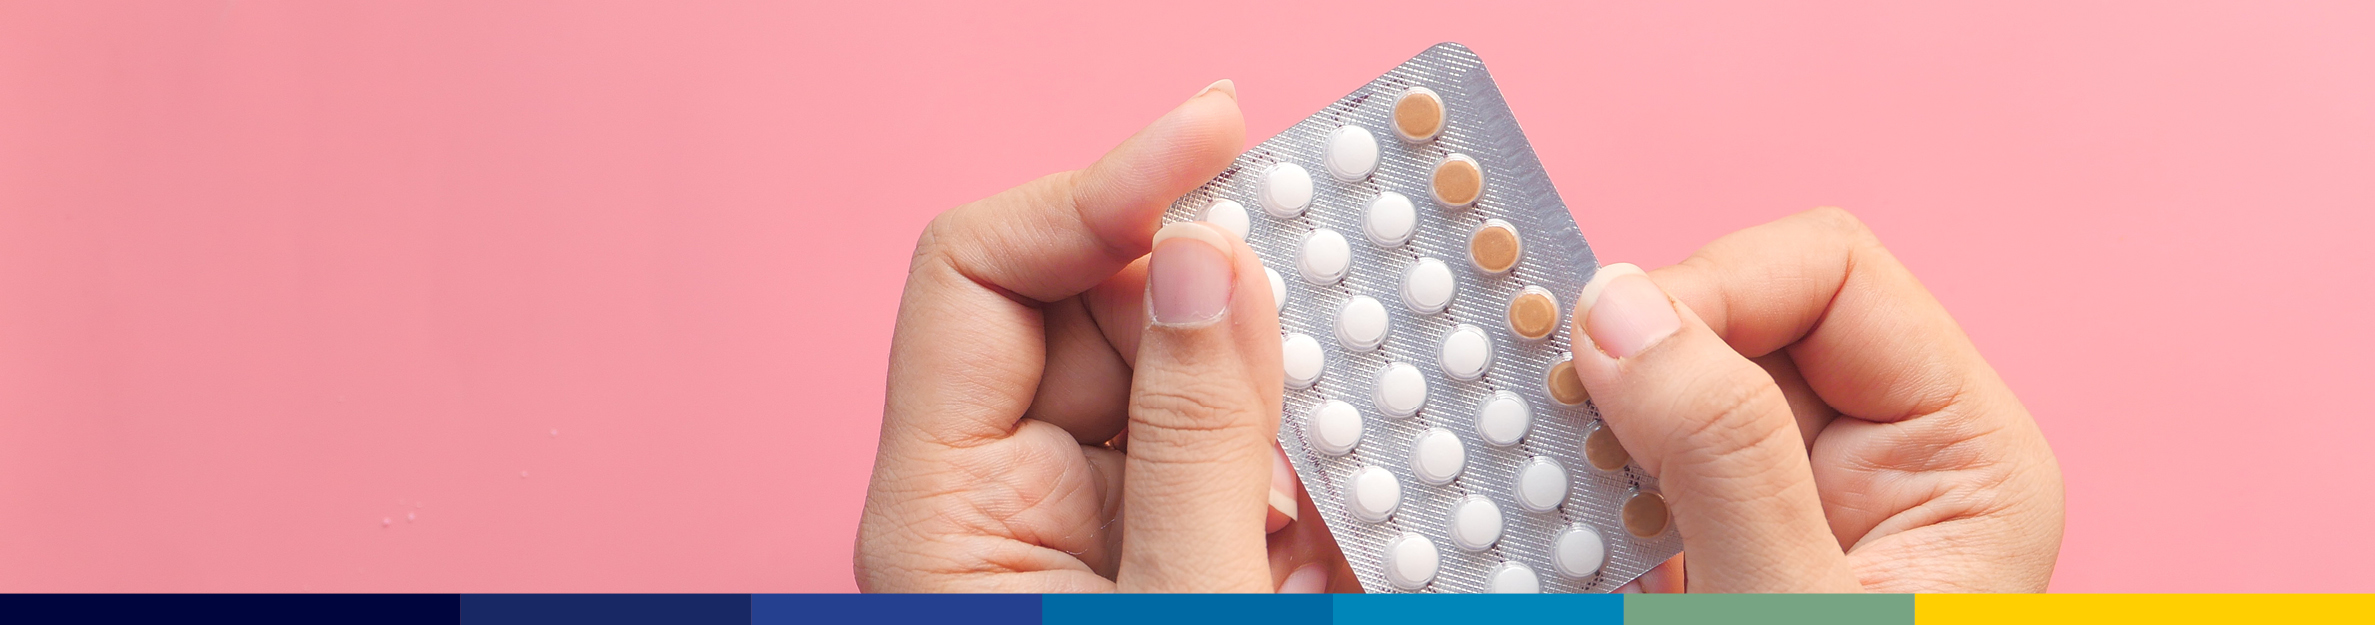 FDA Approves the First Over-the-Counter Oral Contraceptive hero image